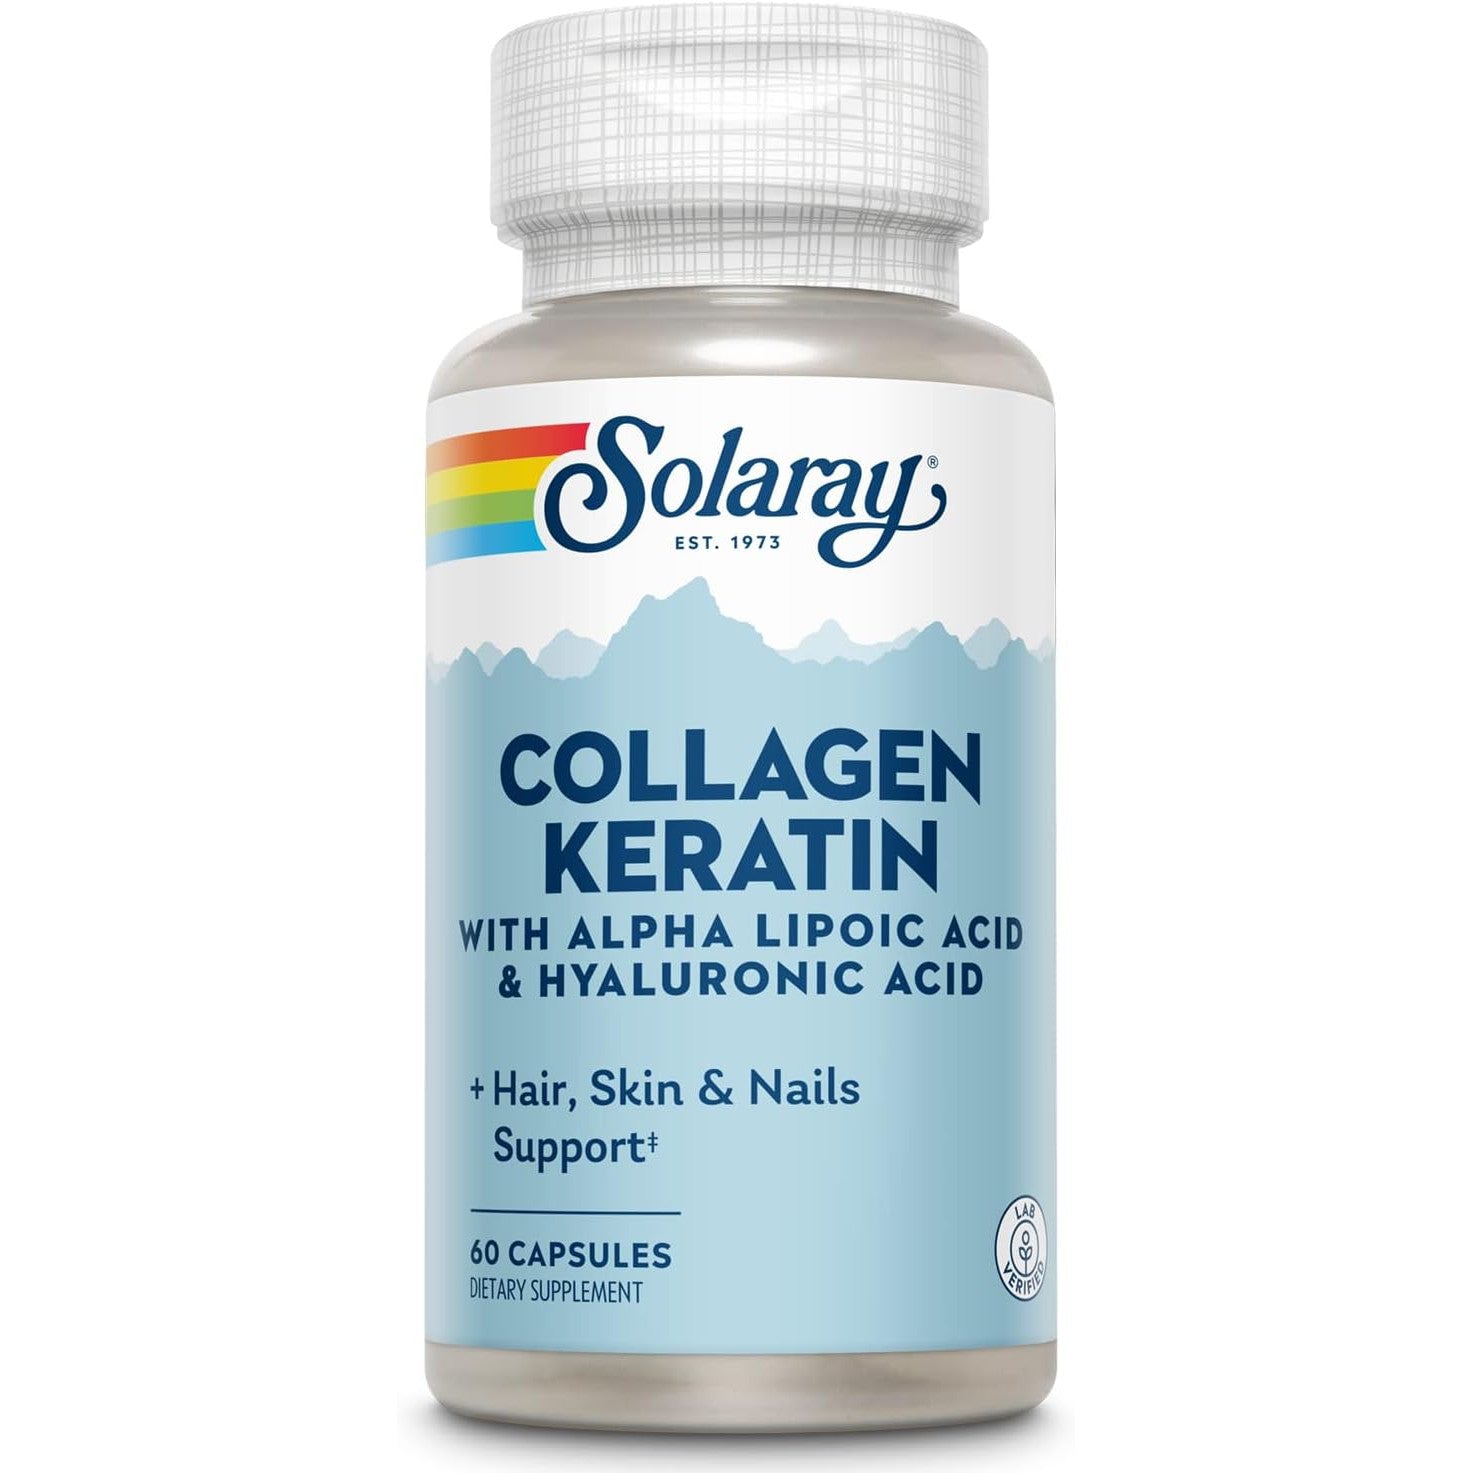 Solaray Collagen Keratin with Alpha Lipoic Acid and Hyaluronic Acid - Type I, II and III Collagen for Hair, Skin, Nails, and Joint Health Support 60 Capsules